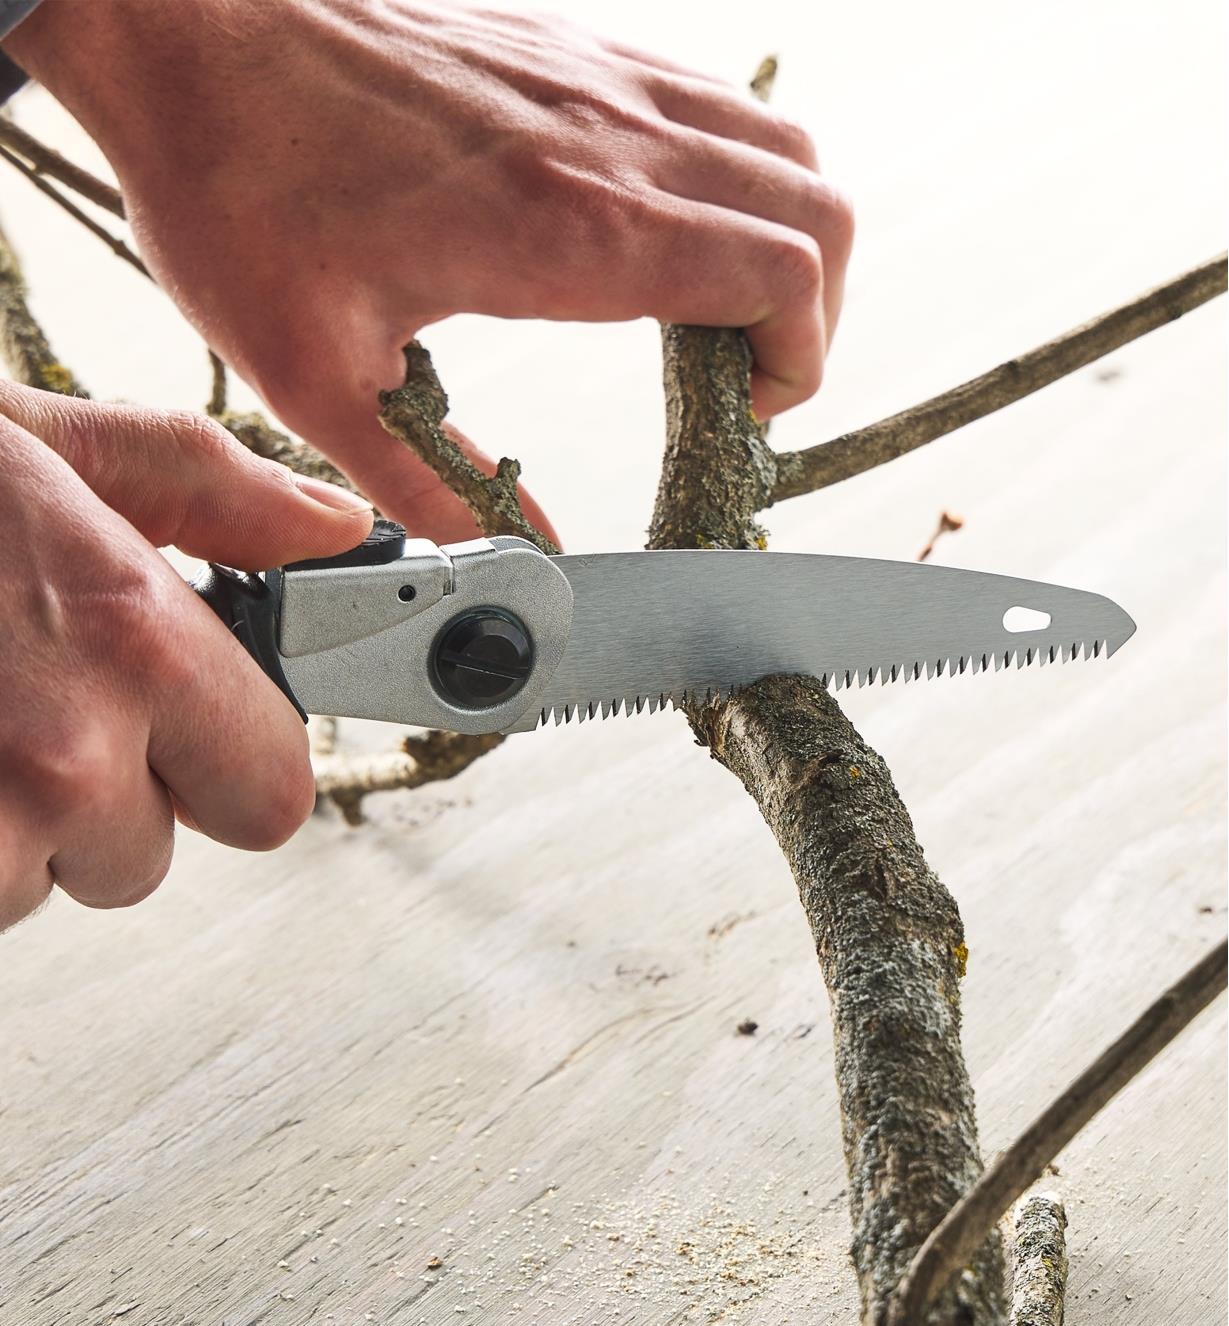 Using the folding pocket saw with the 11 tpi blade to cut a branch